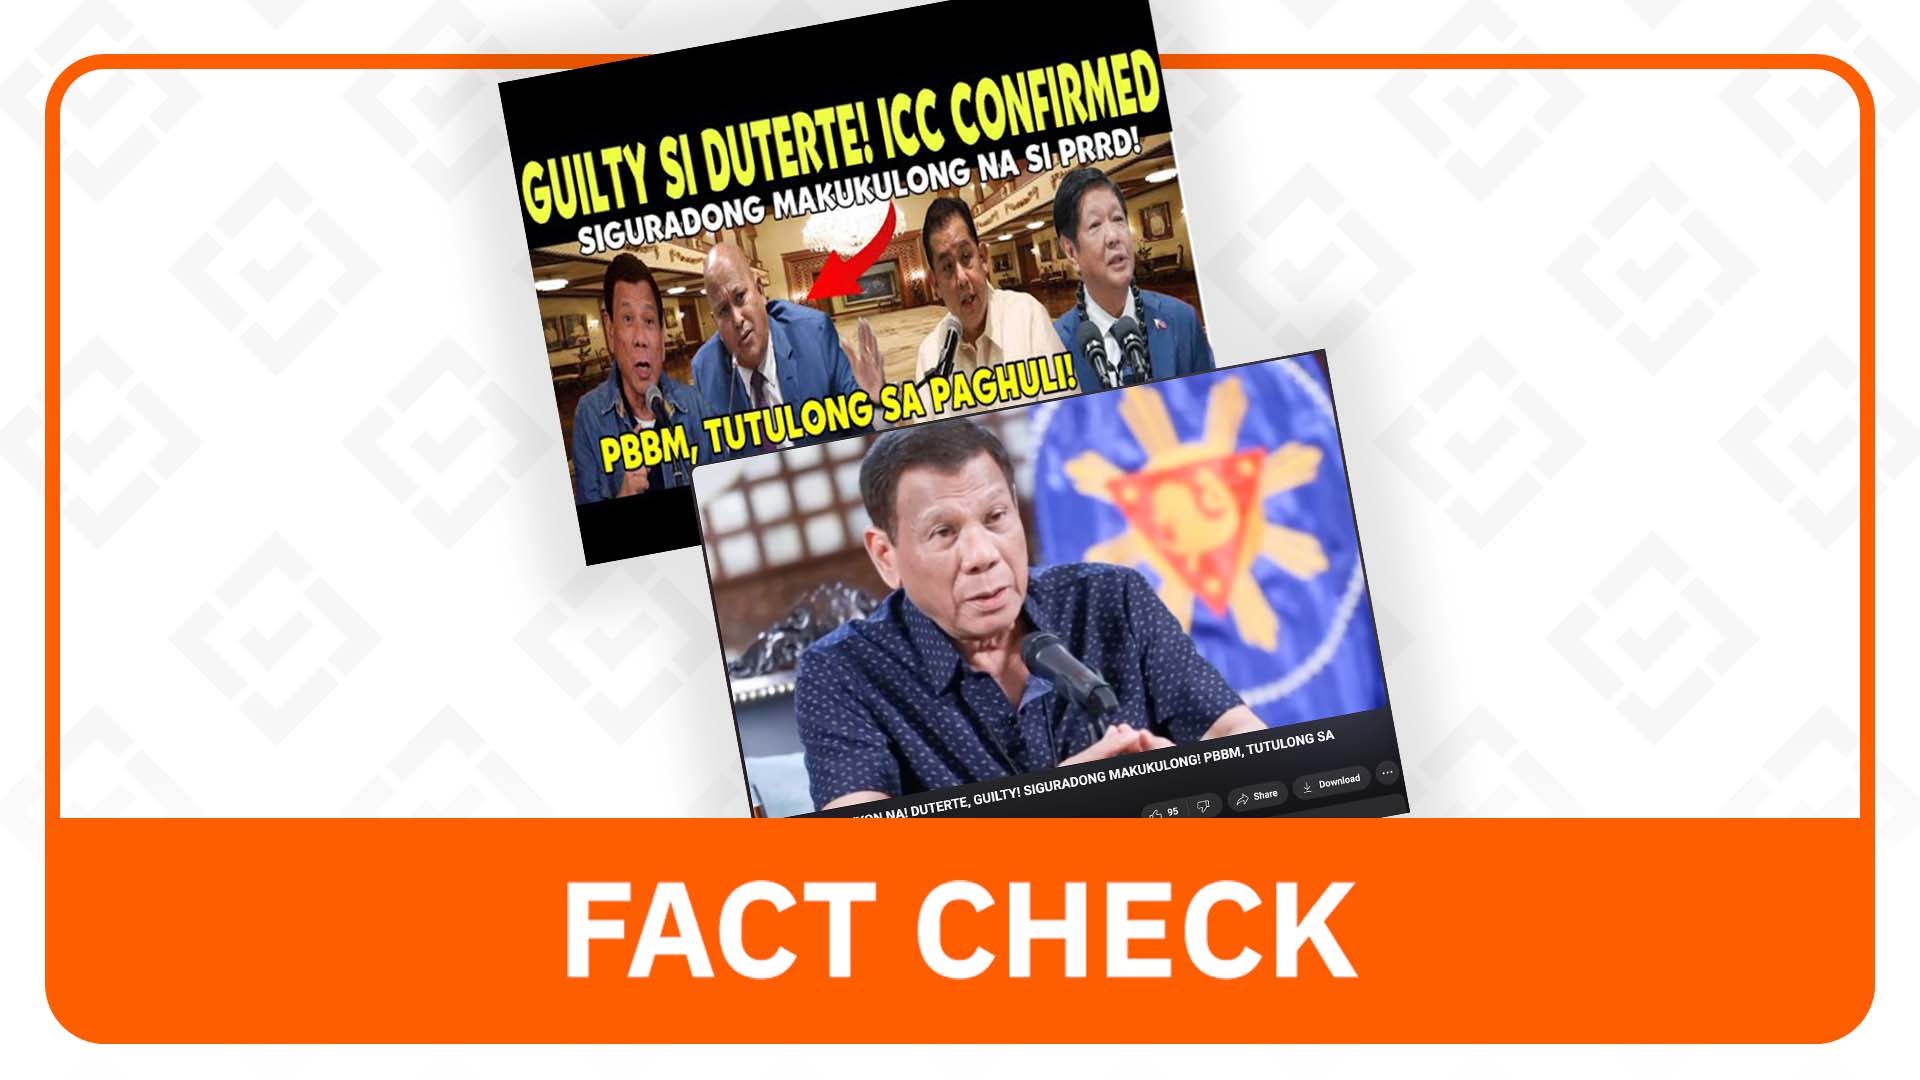 FACT CHECK: ICC probe ongoing, no ‘guilty’ verdict issued vs Duterte